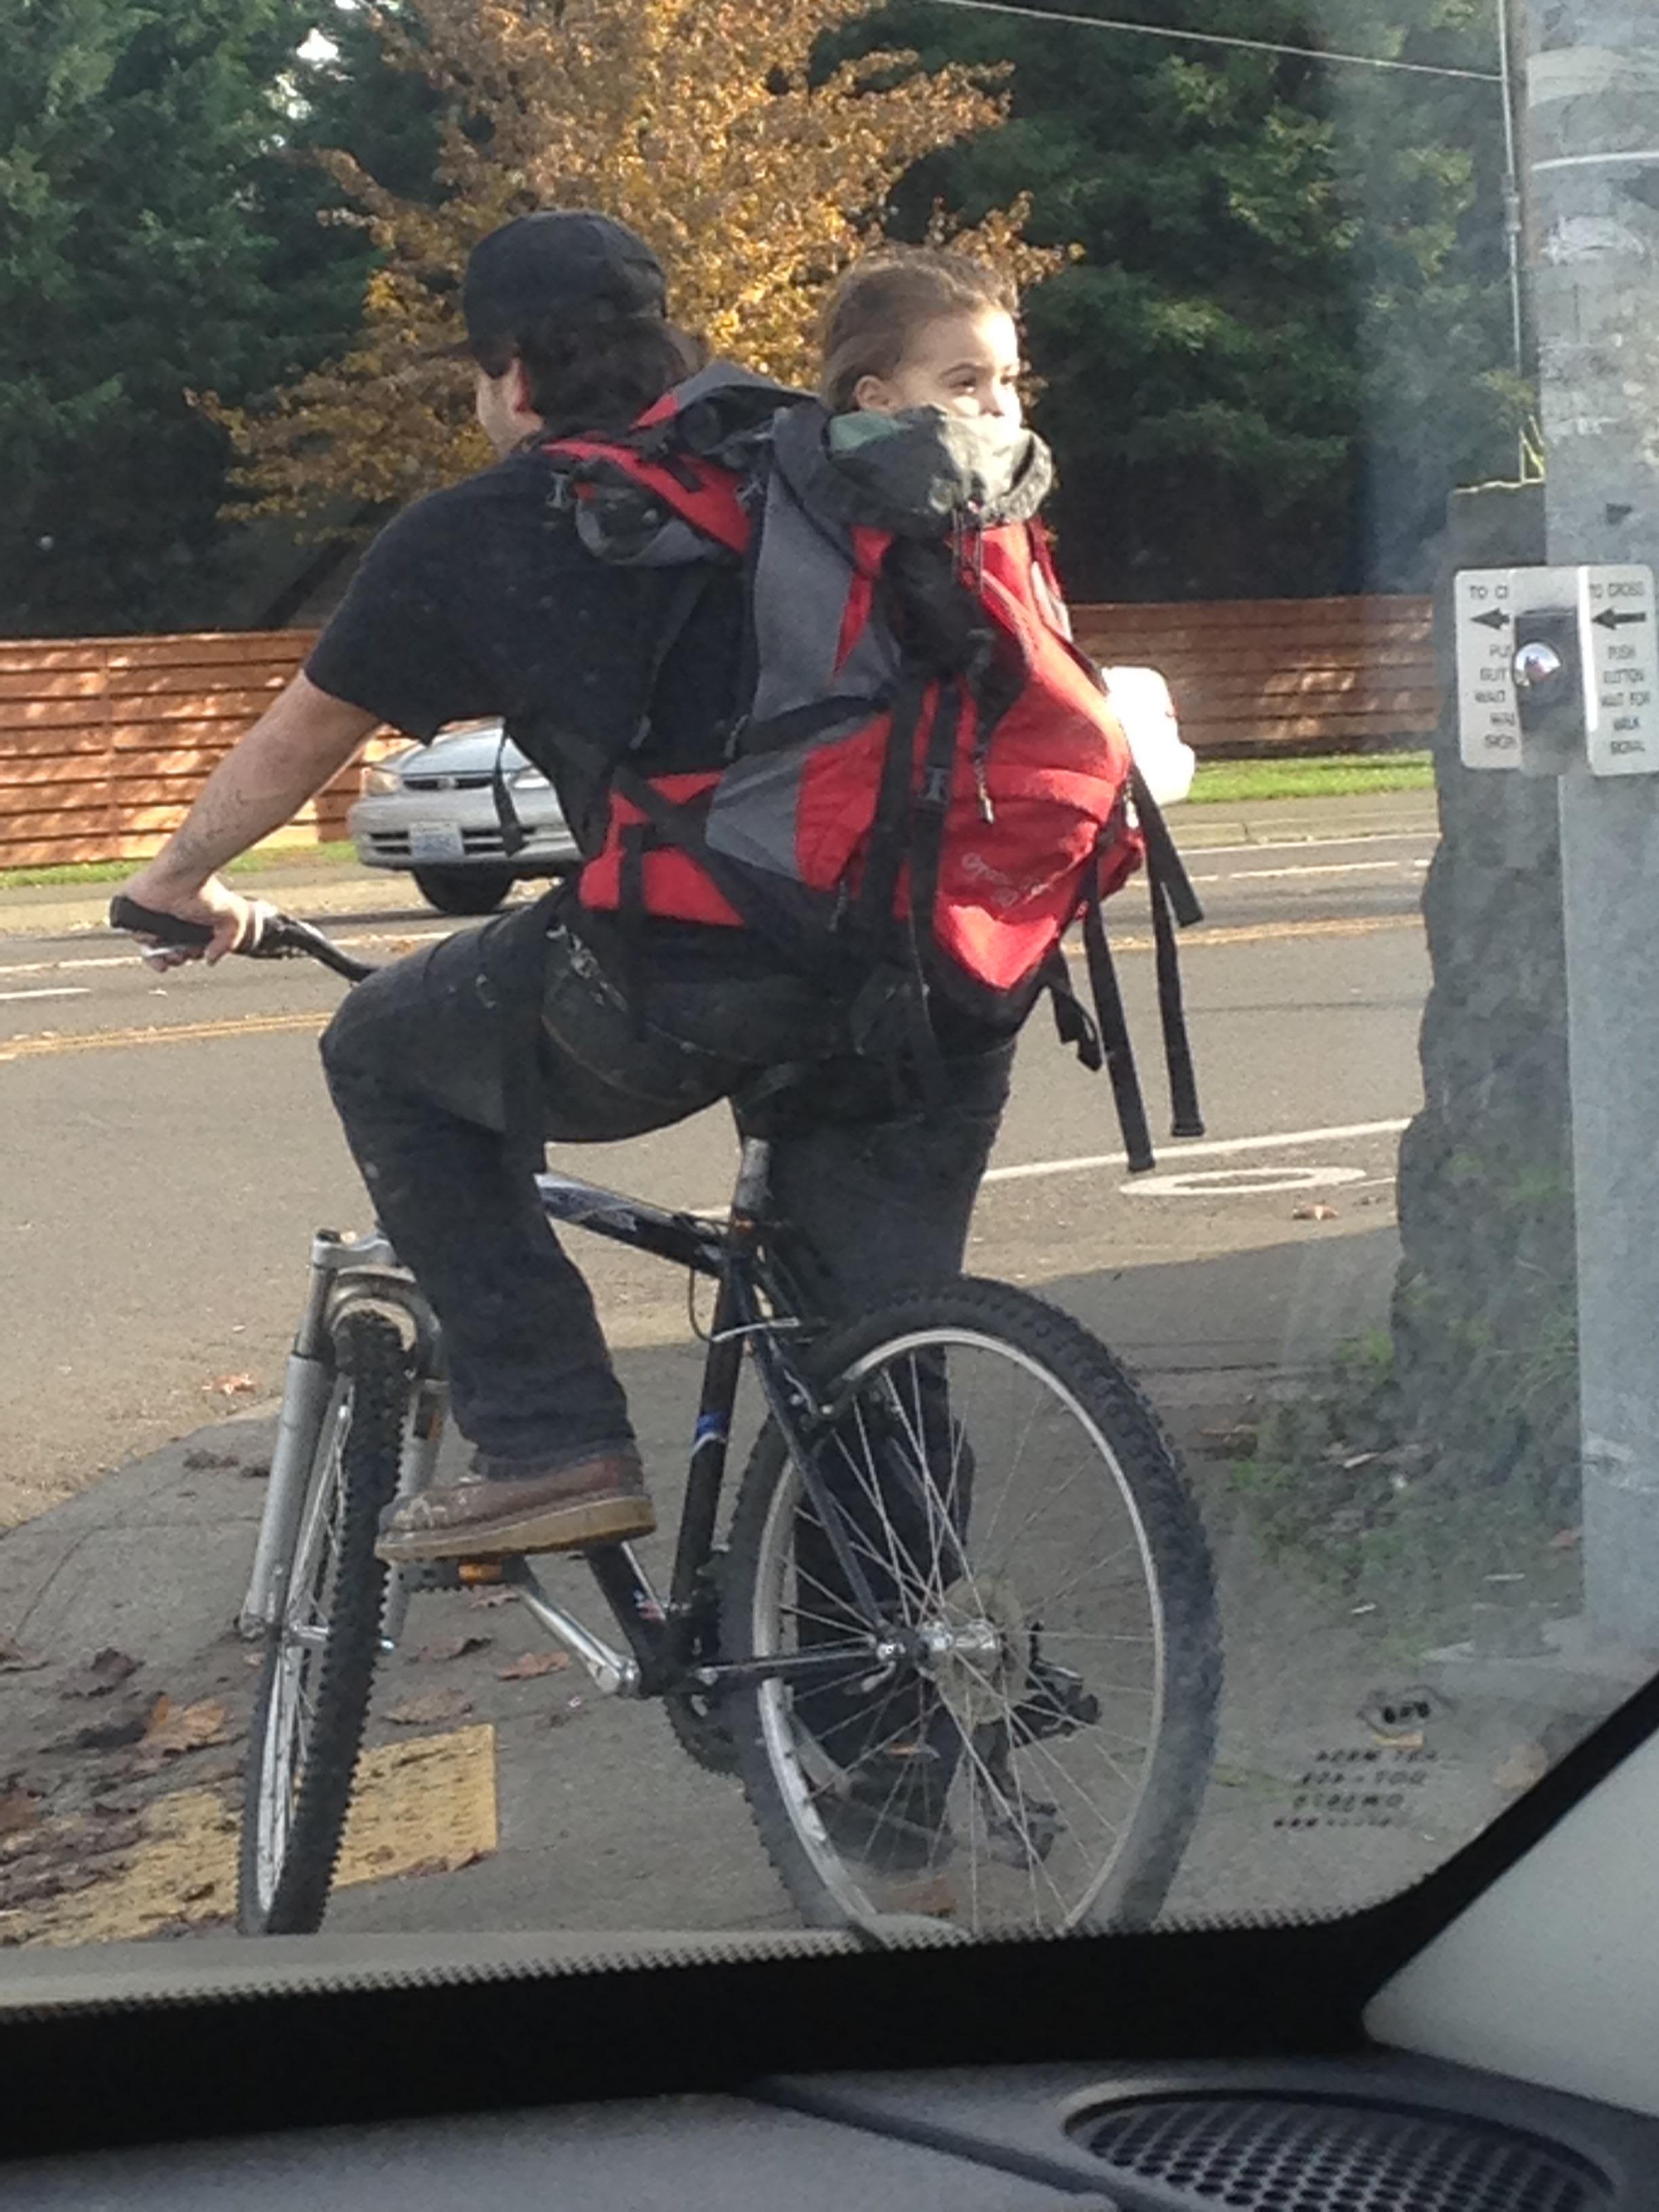 At least he left his backpack open so the kid could enjoy the weather...